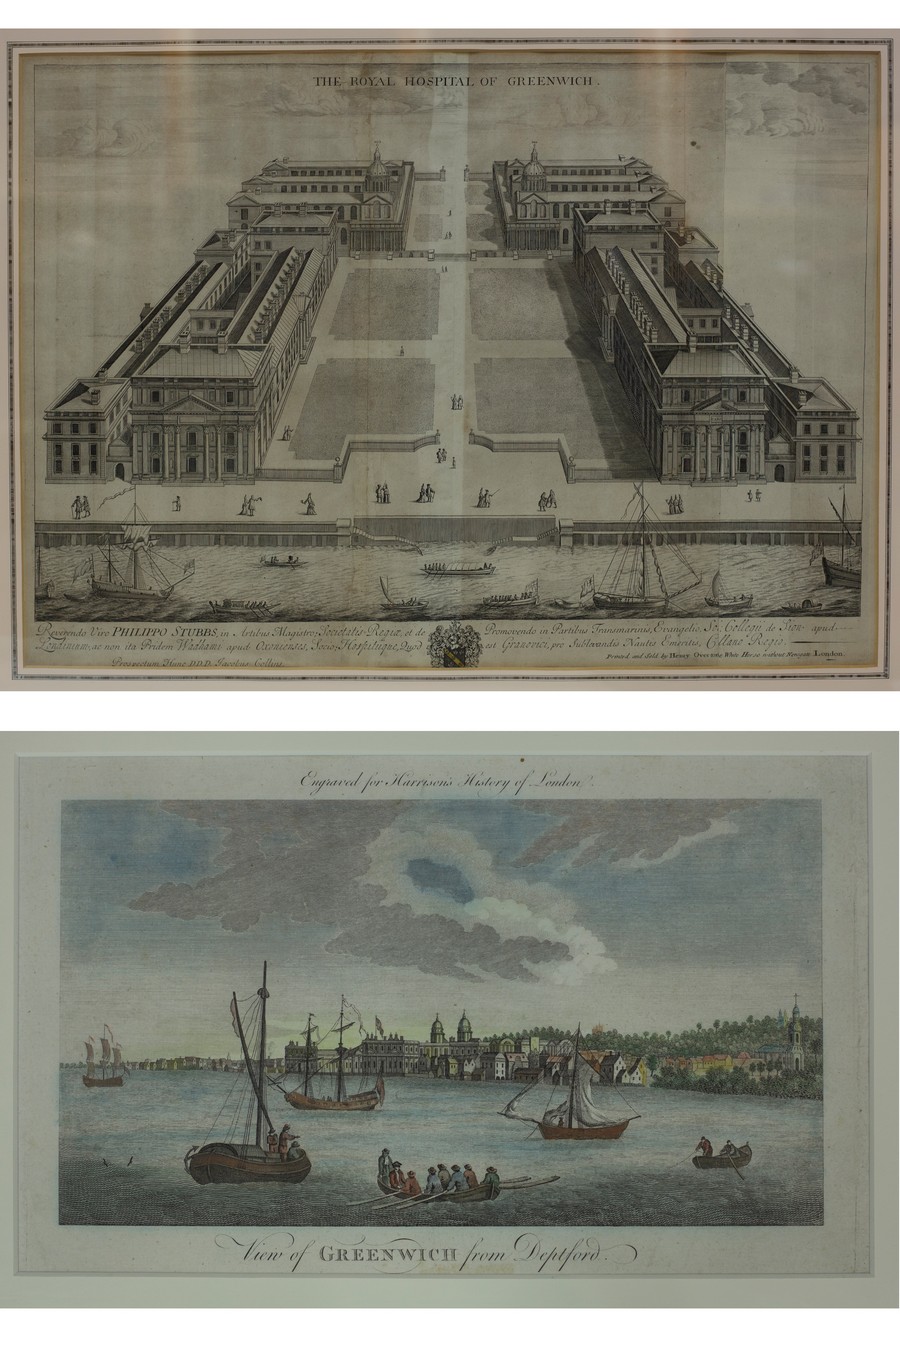 After Jacobus Collins/Half Birds-eye View of the Royal Hospital of Greenwich/sold by Henry Overton,